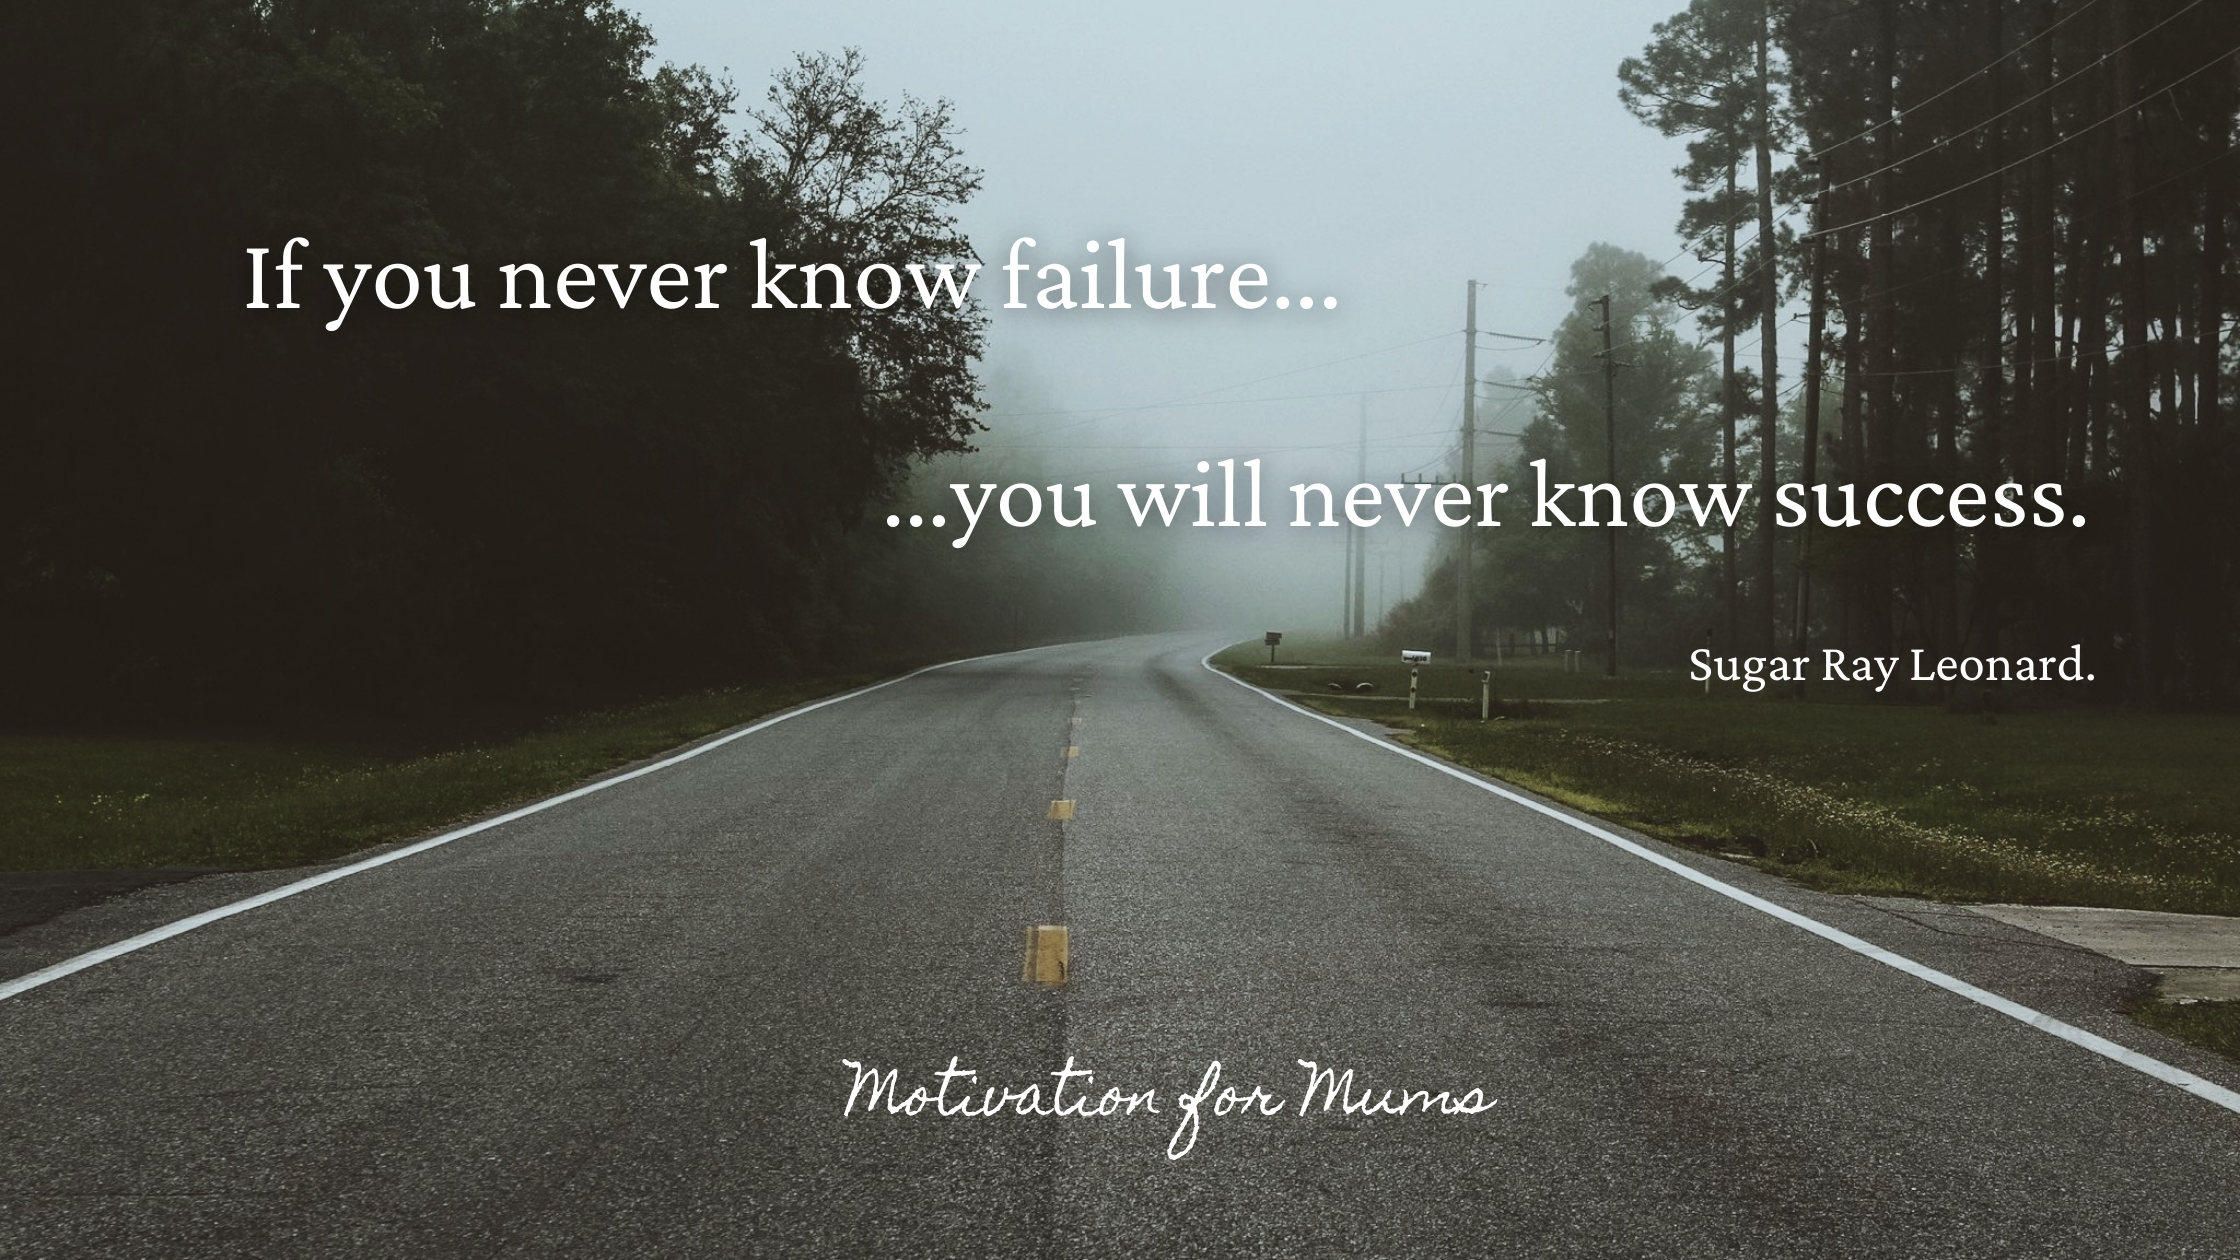 If you never know failure